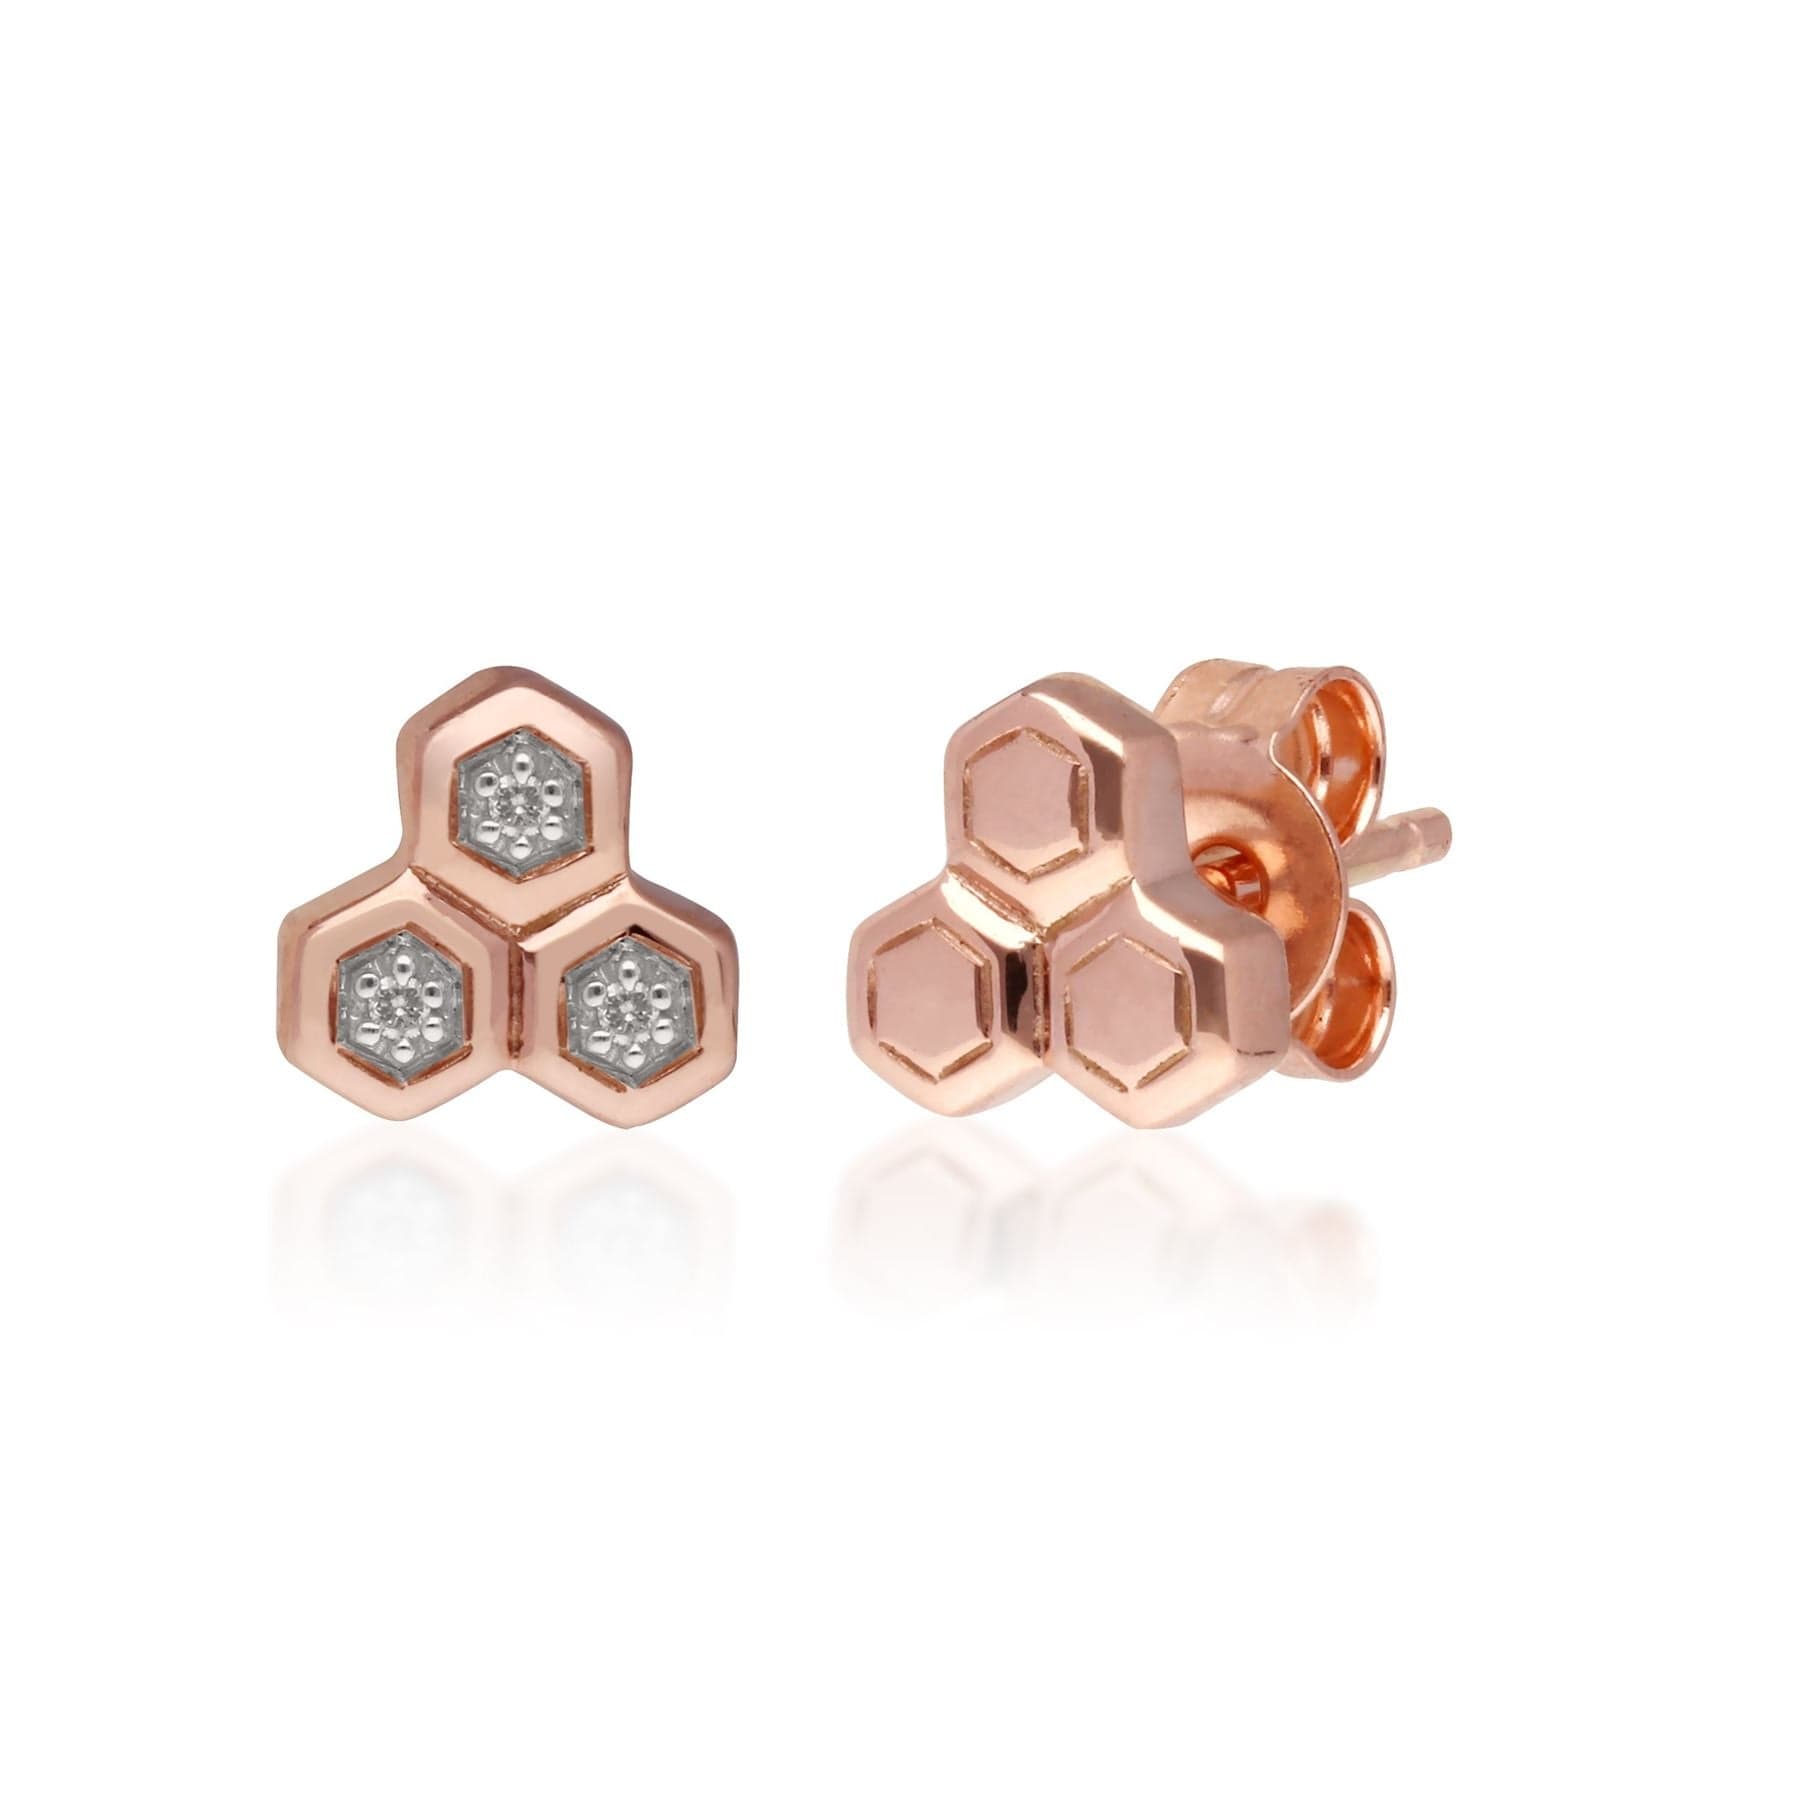 191E0397029 Diamond Trilogy Mismatched Stud Earrings in 9ct Rose Gold 1